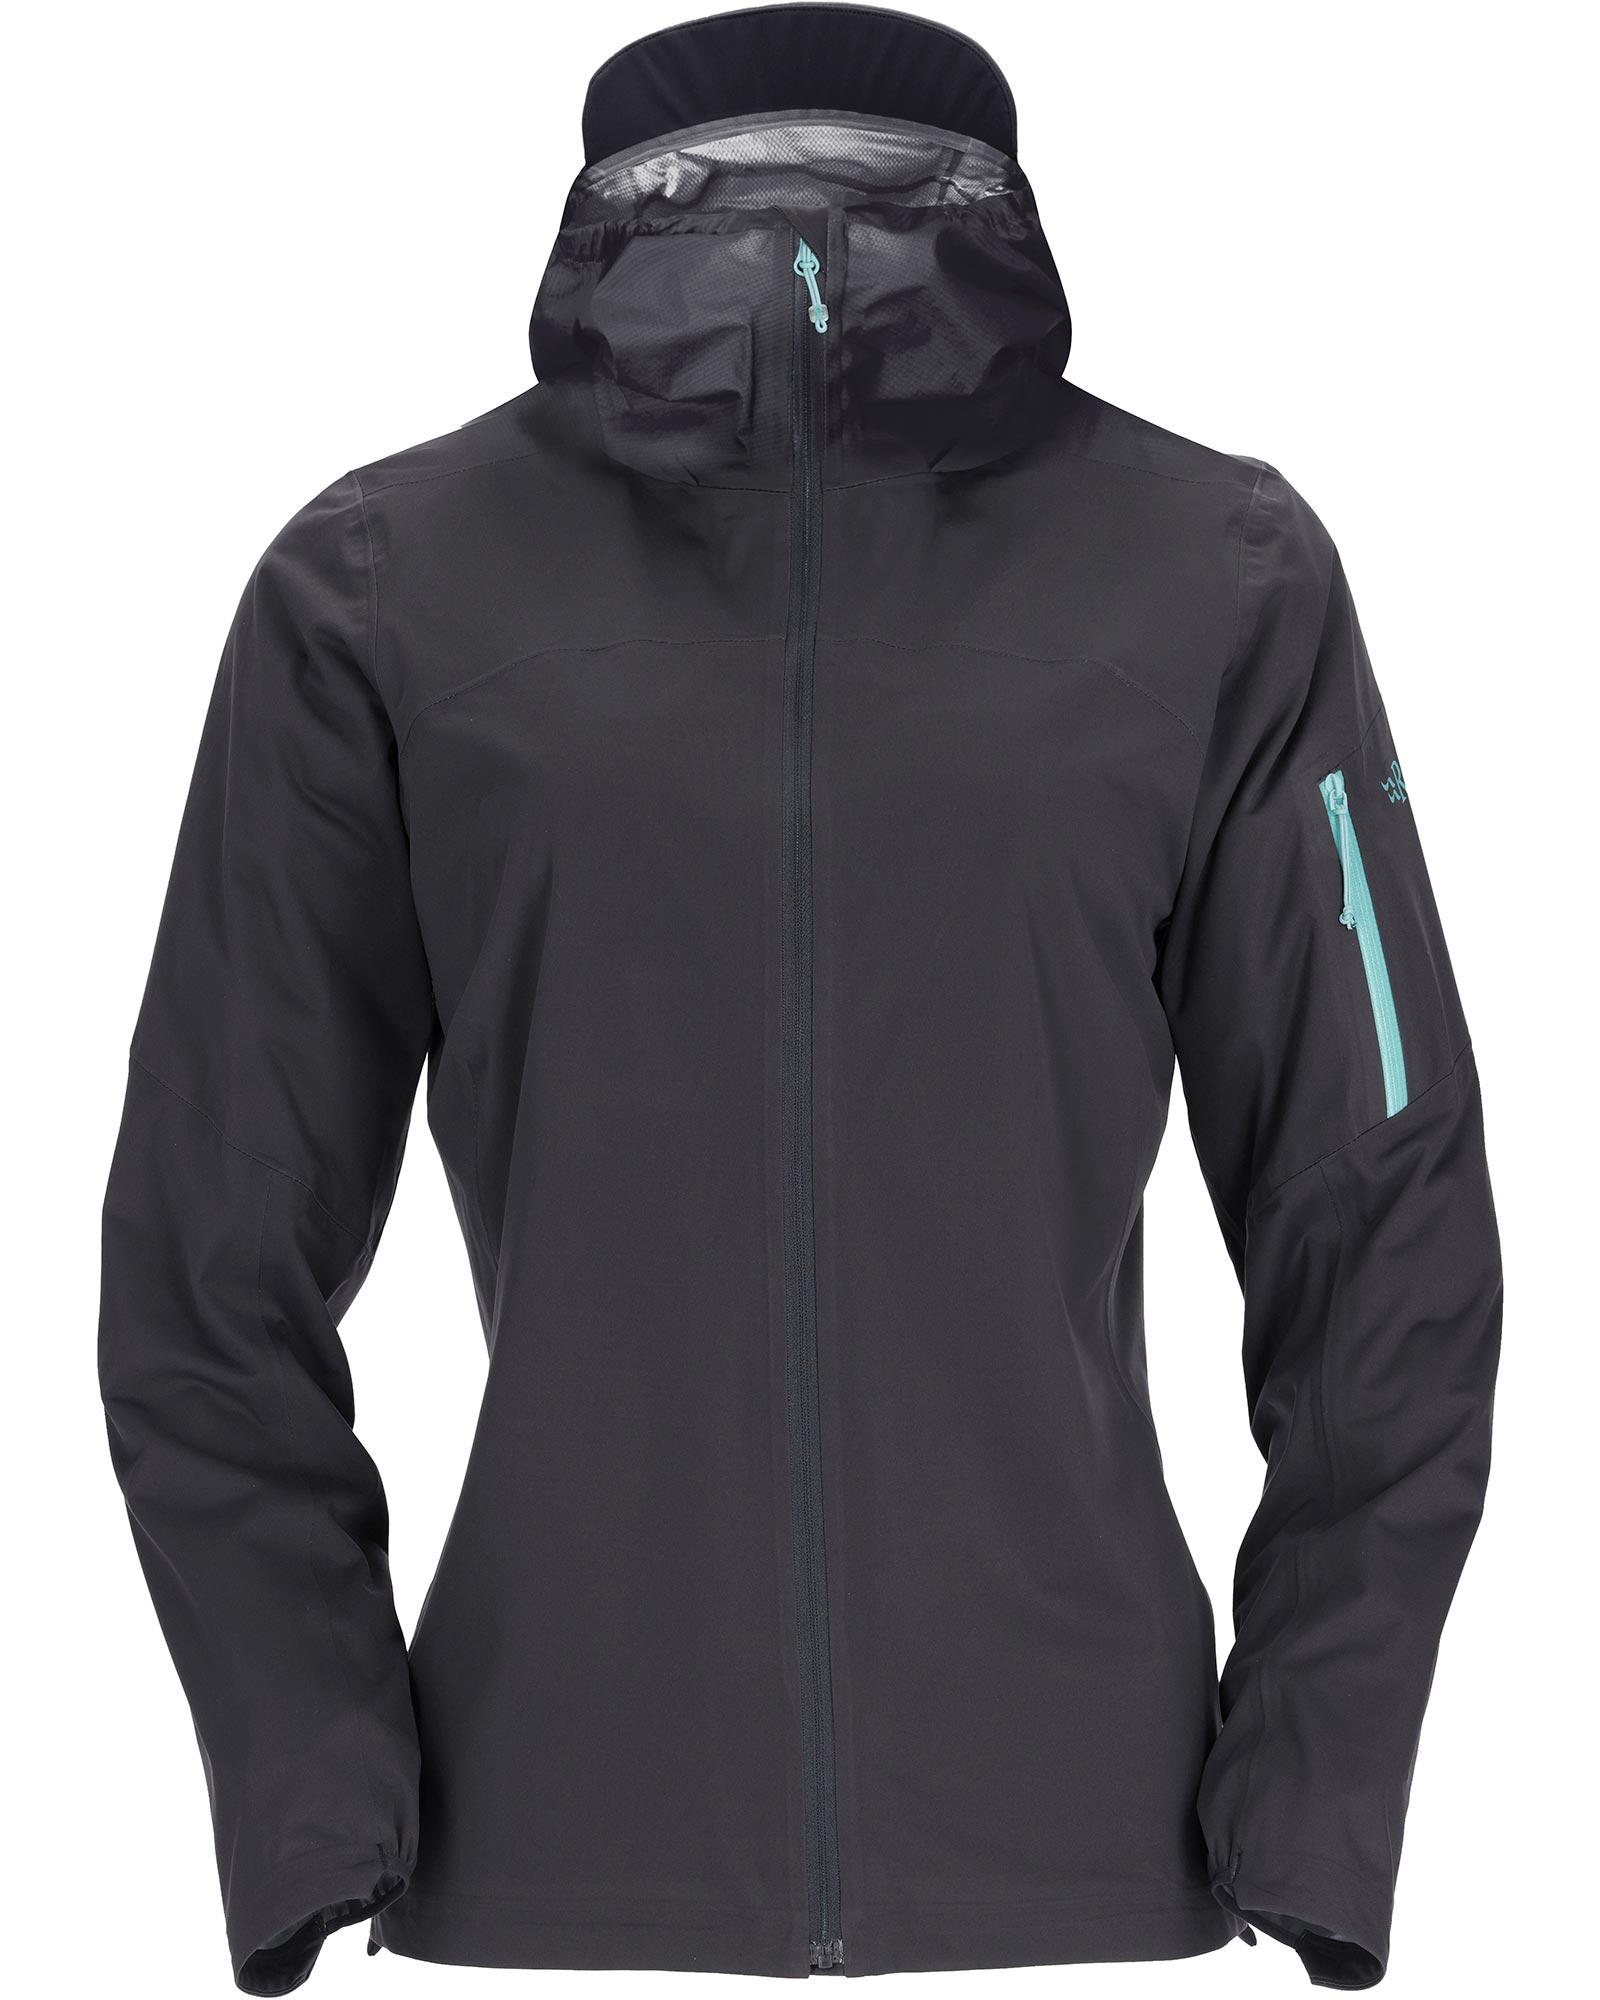 Rab Kinetic Ultra Women’s Jacket - Anthracite 10